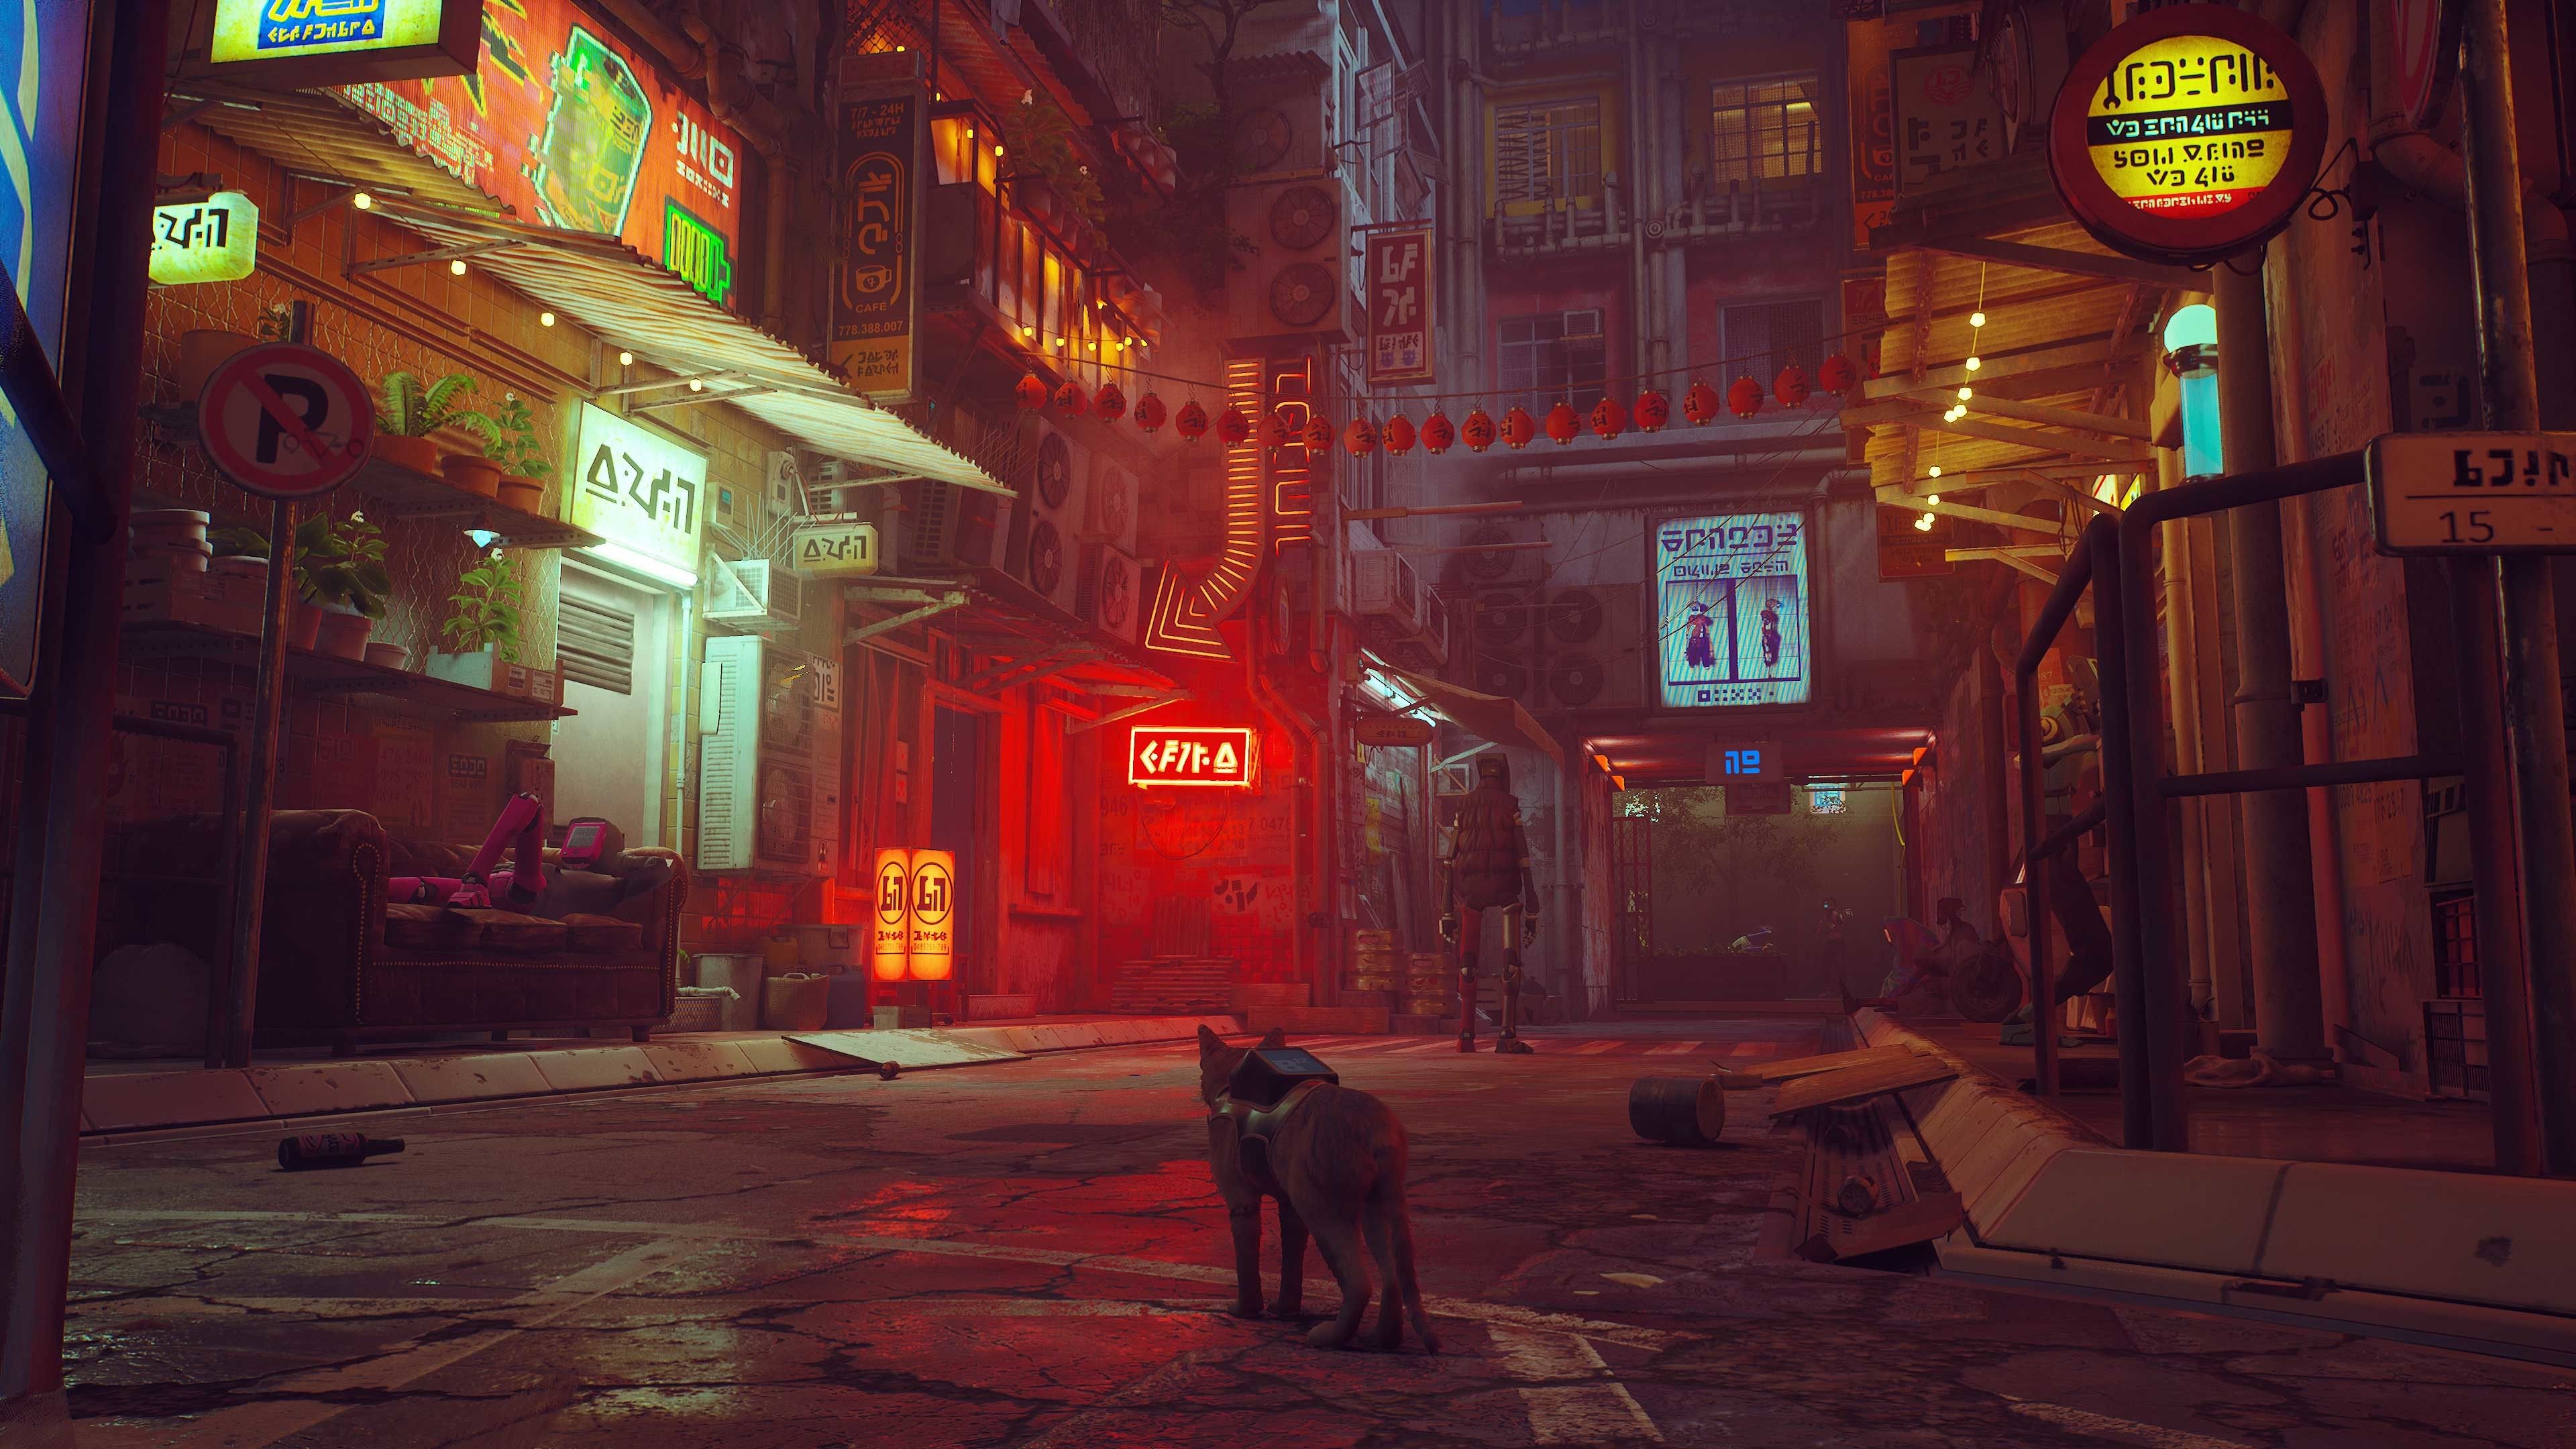 A scene from the video game Stray, in which you play a ginger cat exploring Hong Kong’s former Kowloon Walled City. Seven years in the making, the game is highly engaging. Photo: Annapurna Interactive